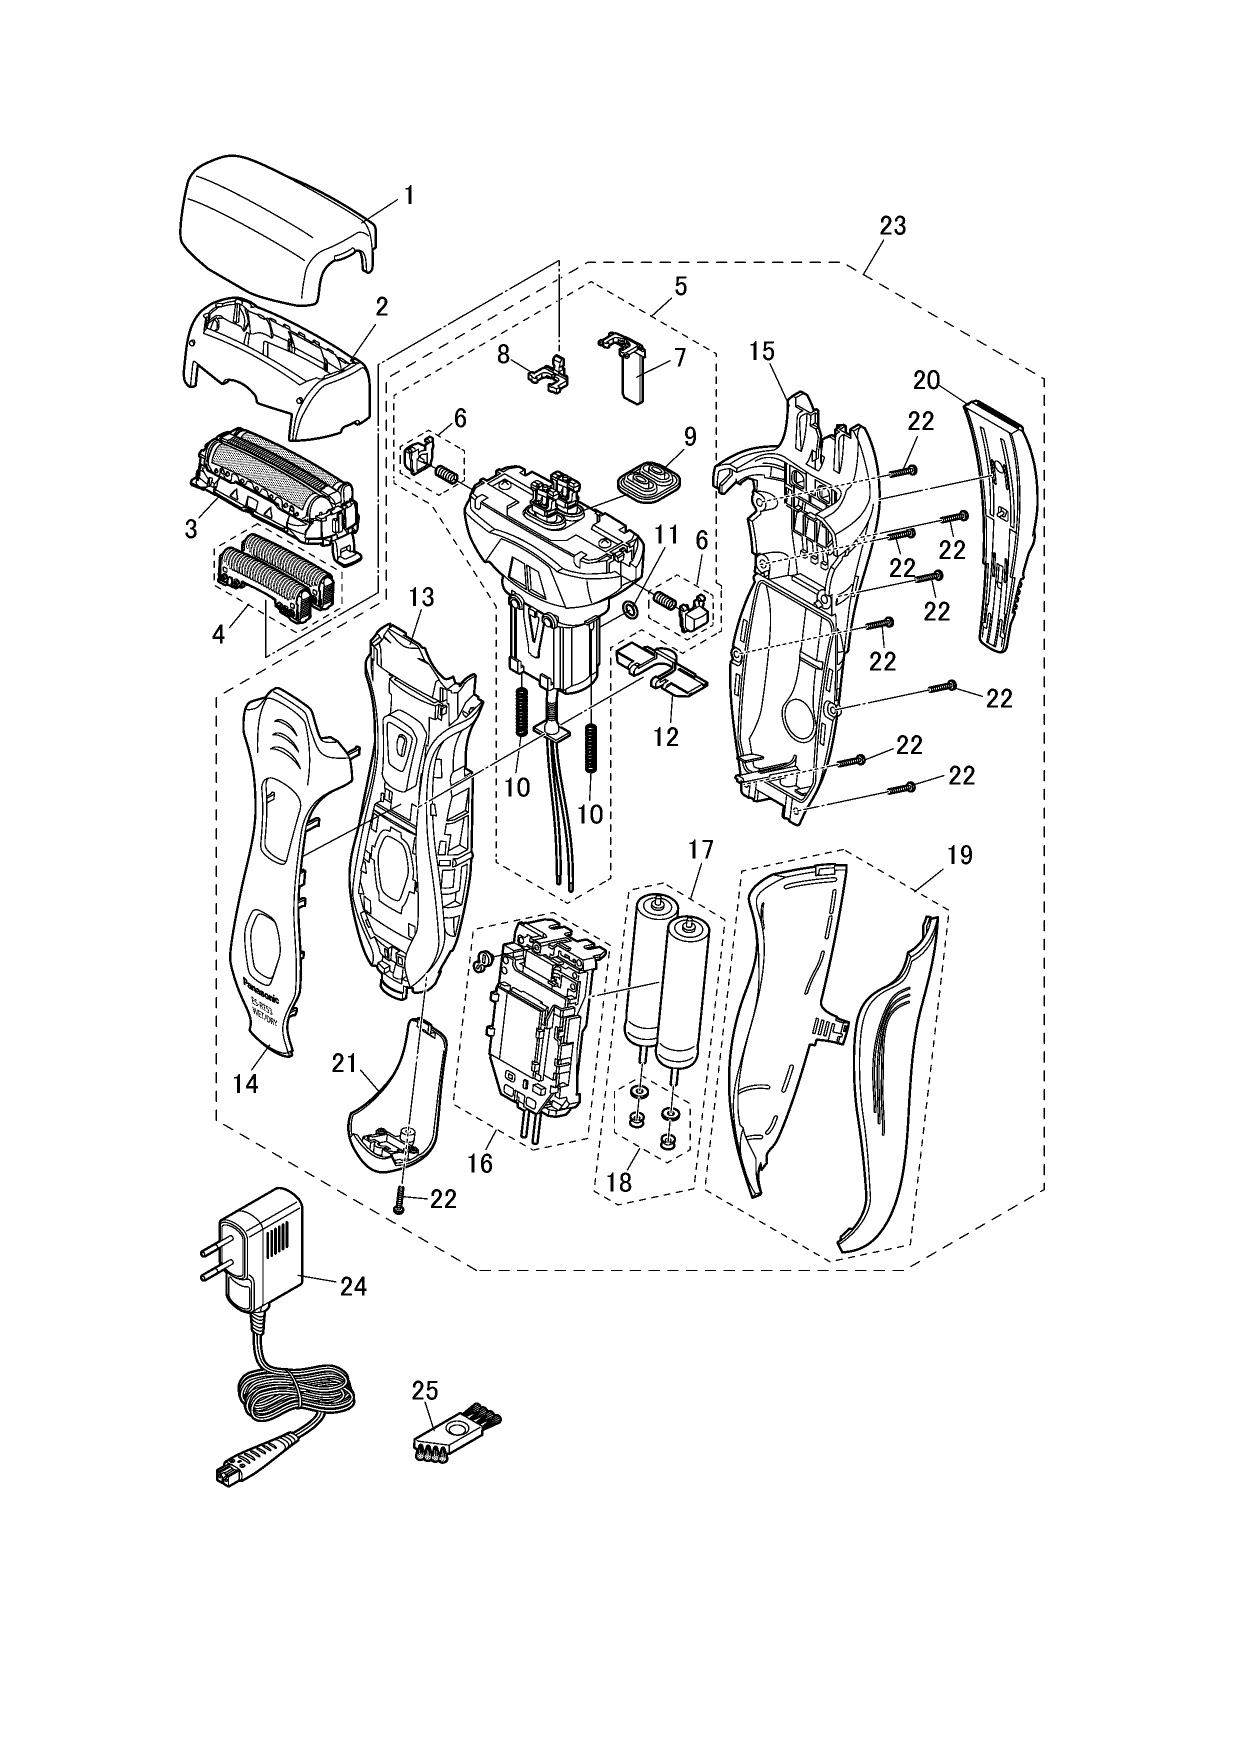 ES-RT53: Exploded View